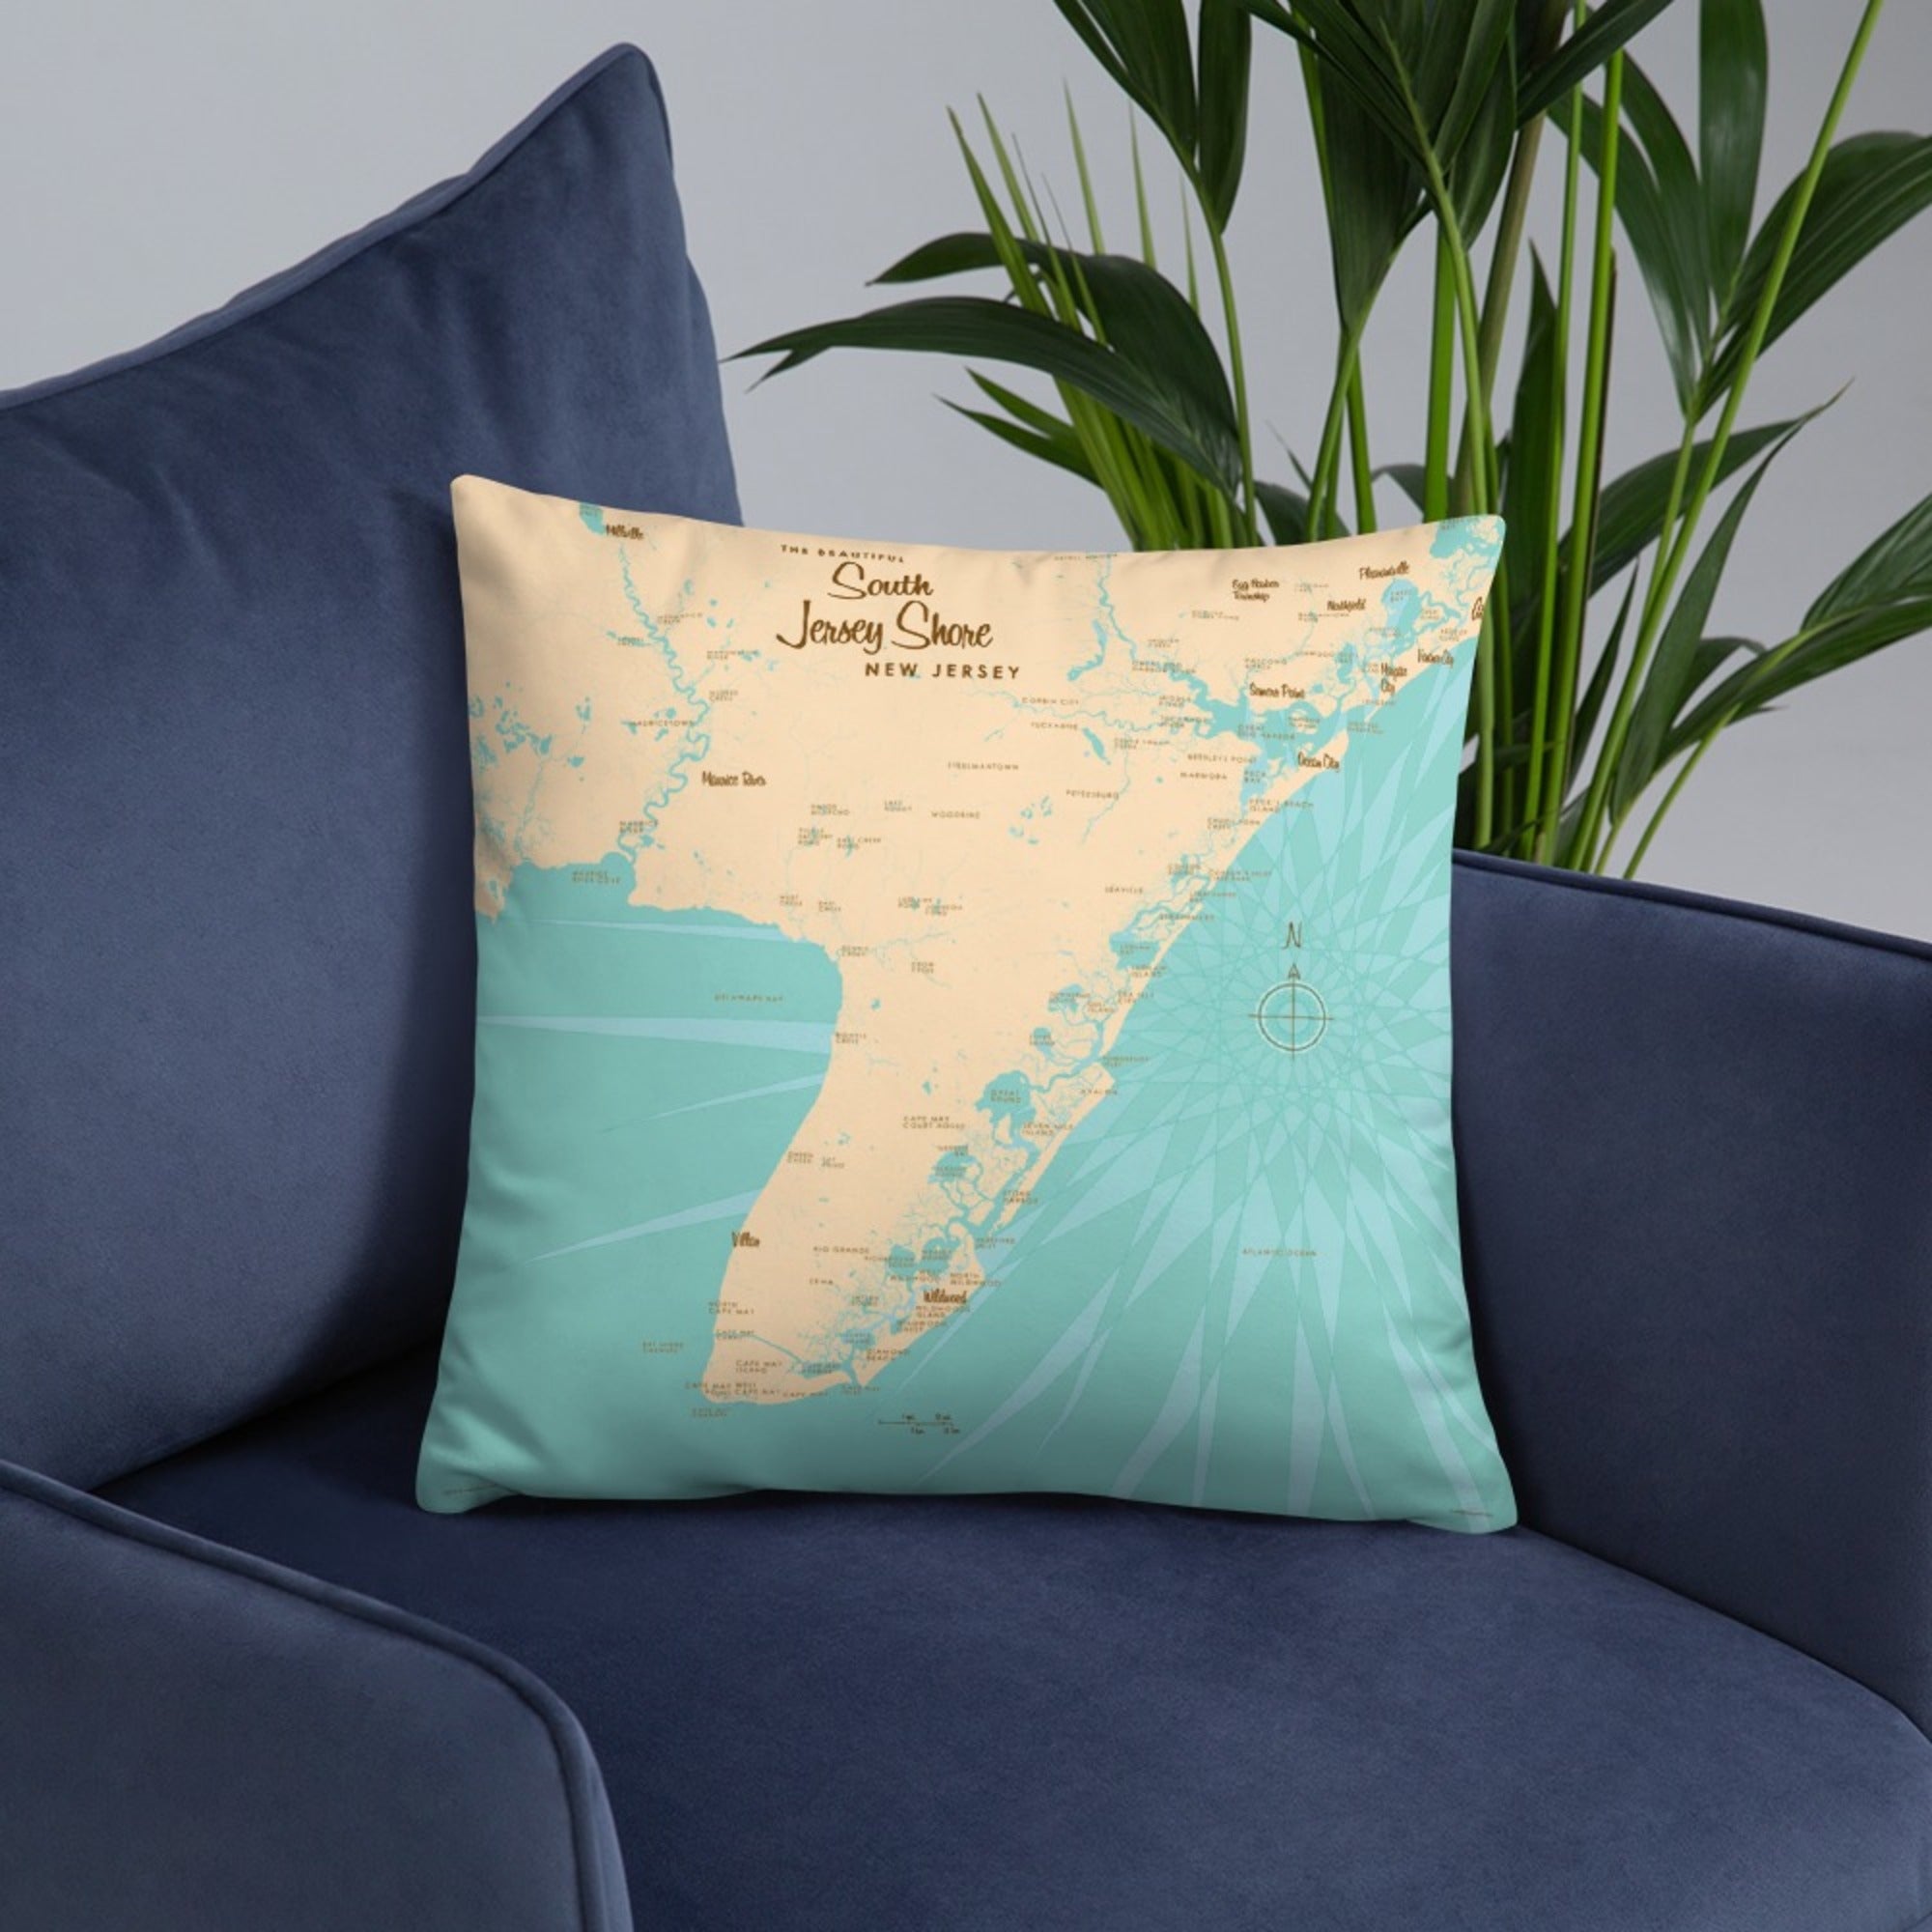 South Jersey Shore New Jersey Pillow